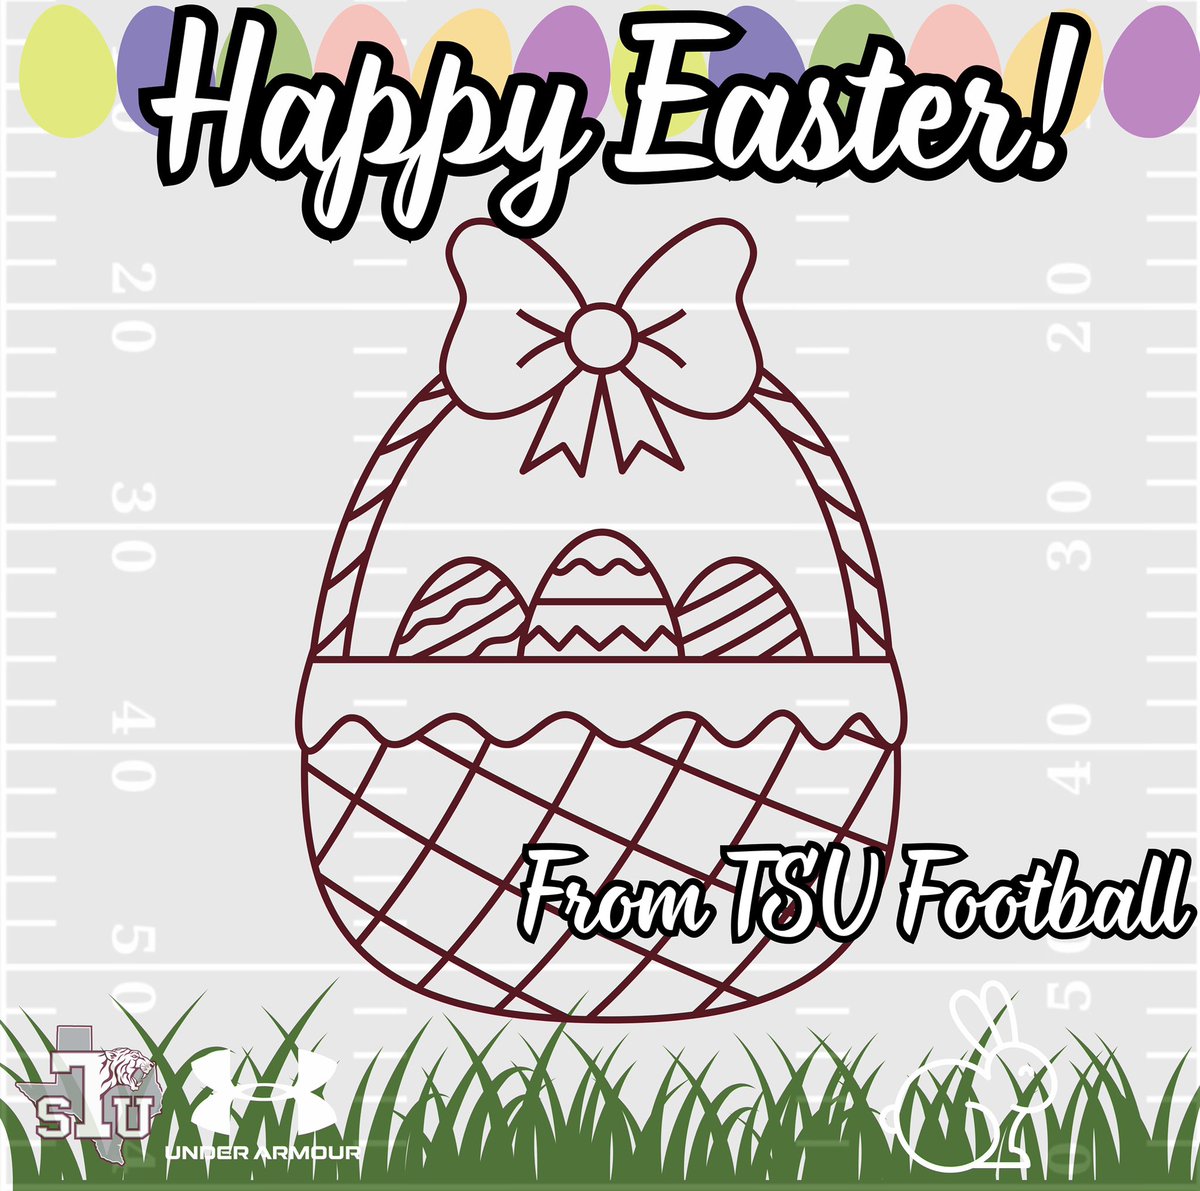 Happy Easter from Texas Southern Football!